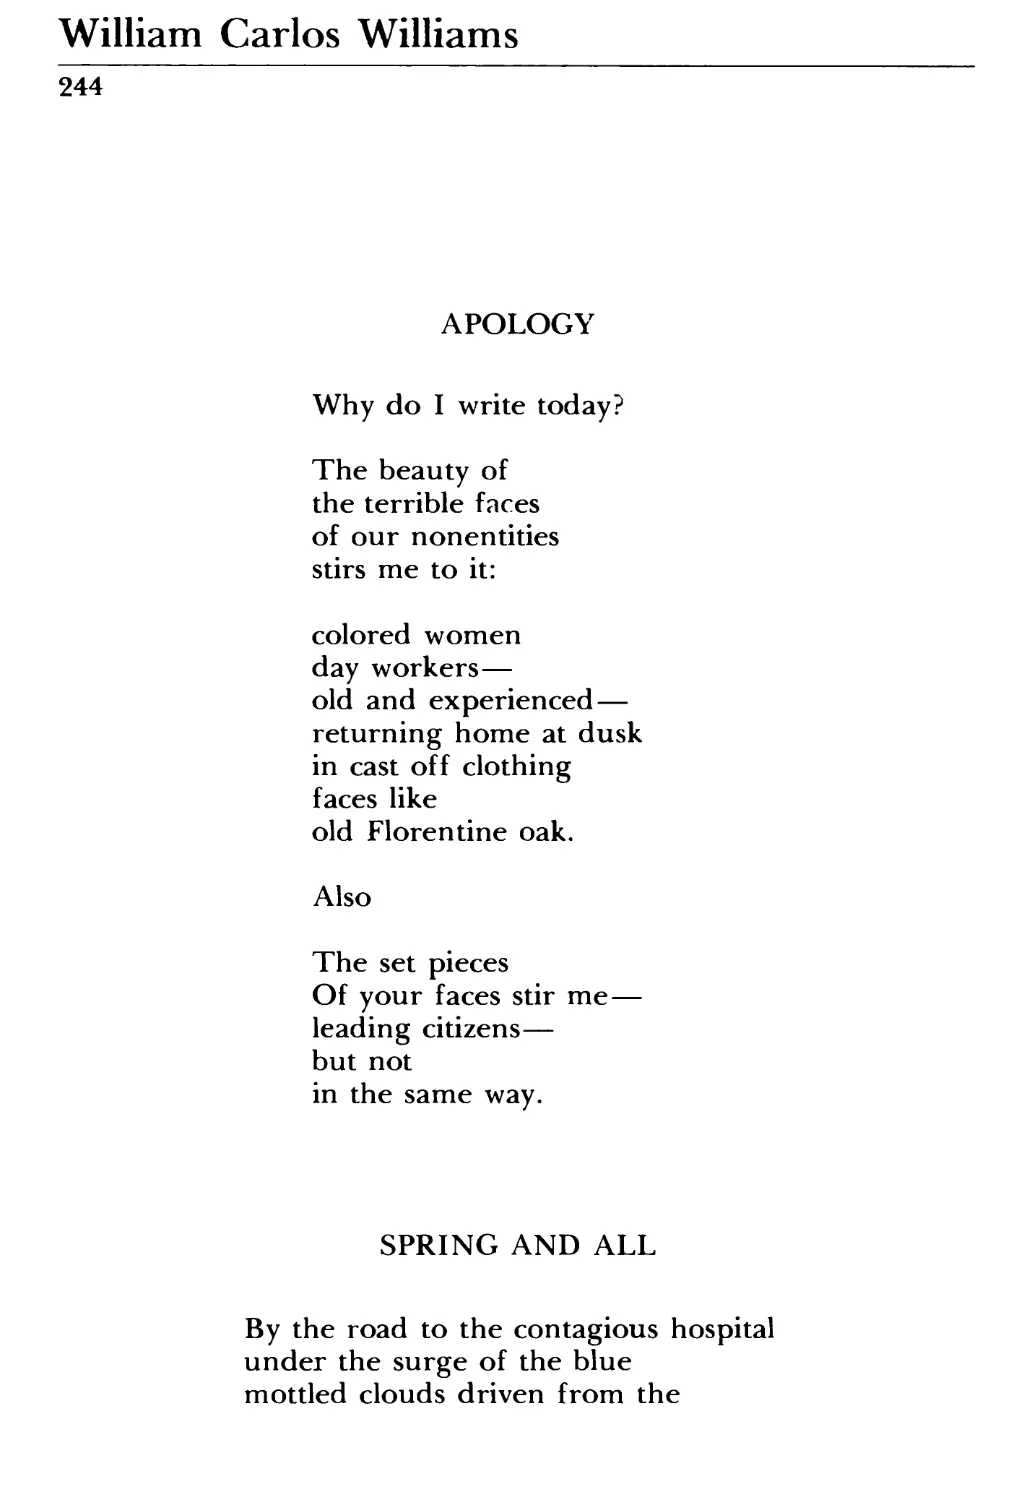 William Carlos Williams / Уильям Карлос Уильямс
Spring and All